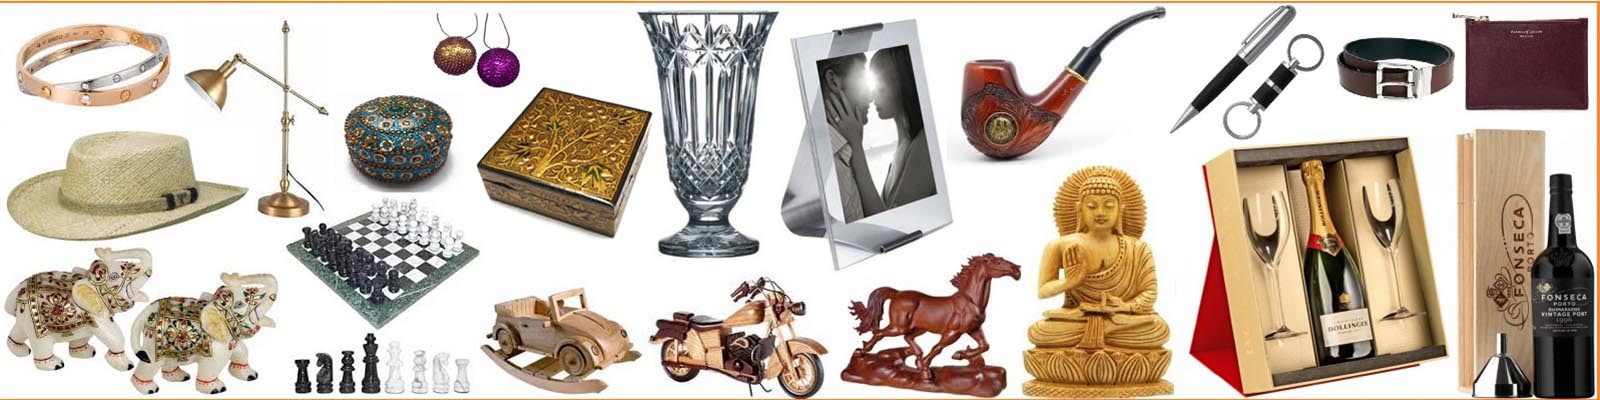 Digital Marketing strategy for Handicrafts, Decorative & Gifts